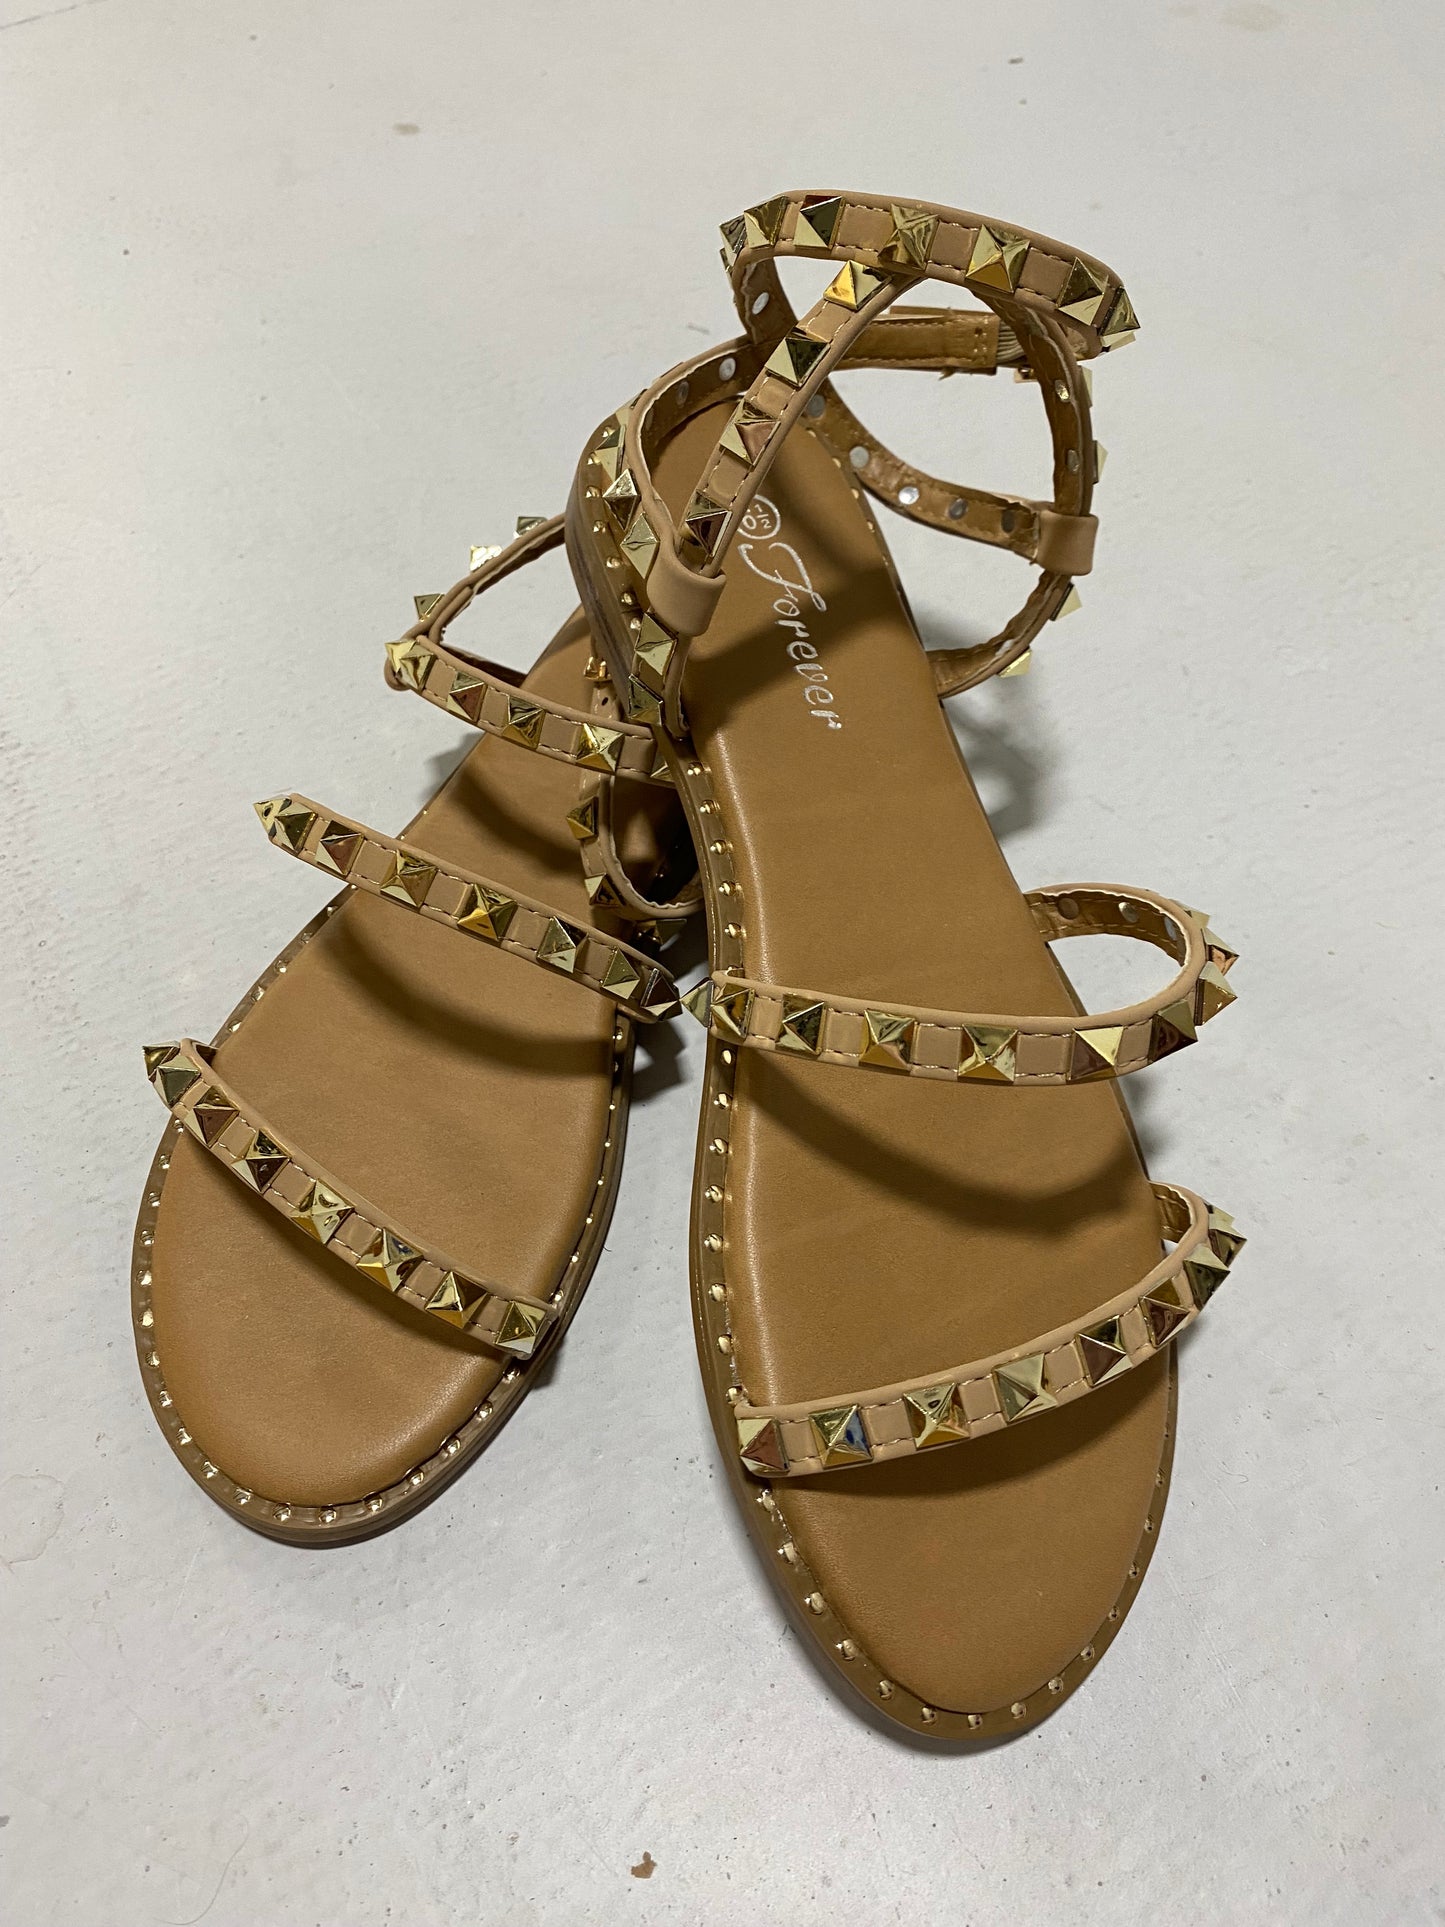 Rockstar Sandals in Taupe